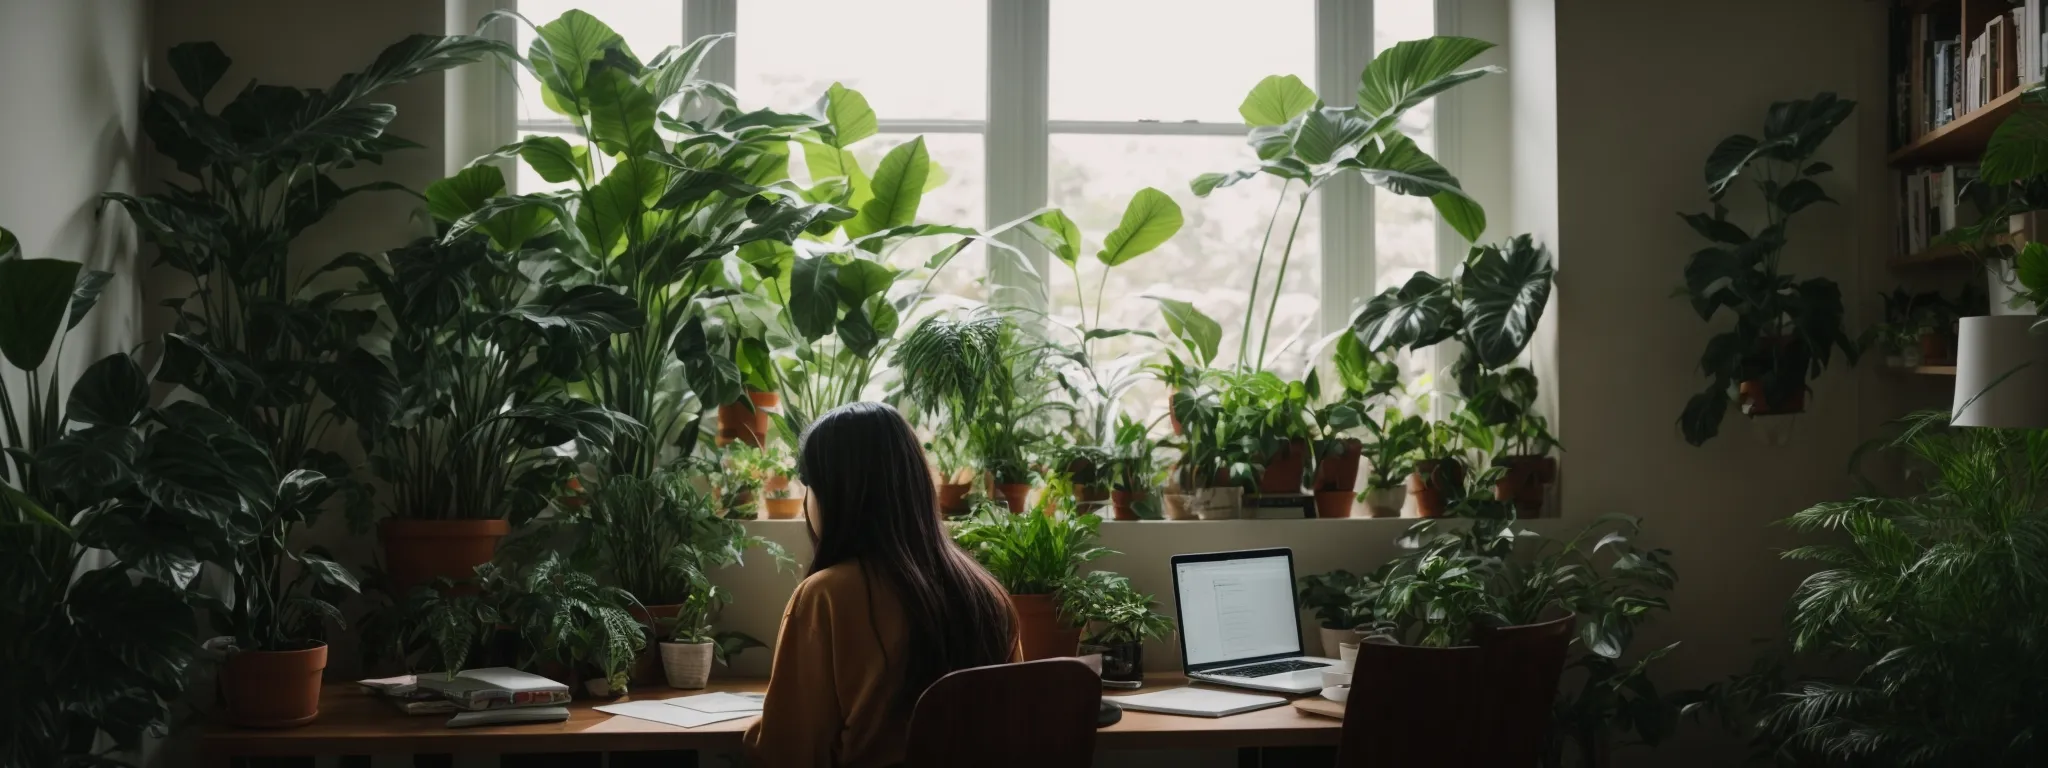 a person sits at a minimalist desk surrounded by houseplants, peering intently into a laptop screen, immersed in brainstorming for their next blog post.